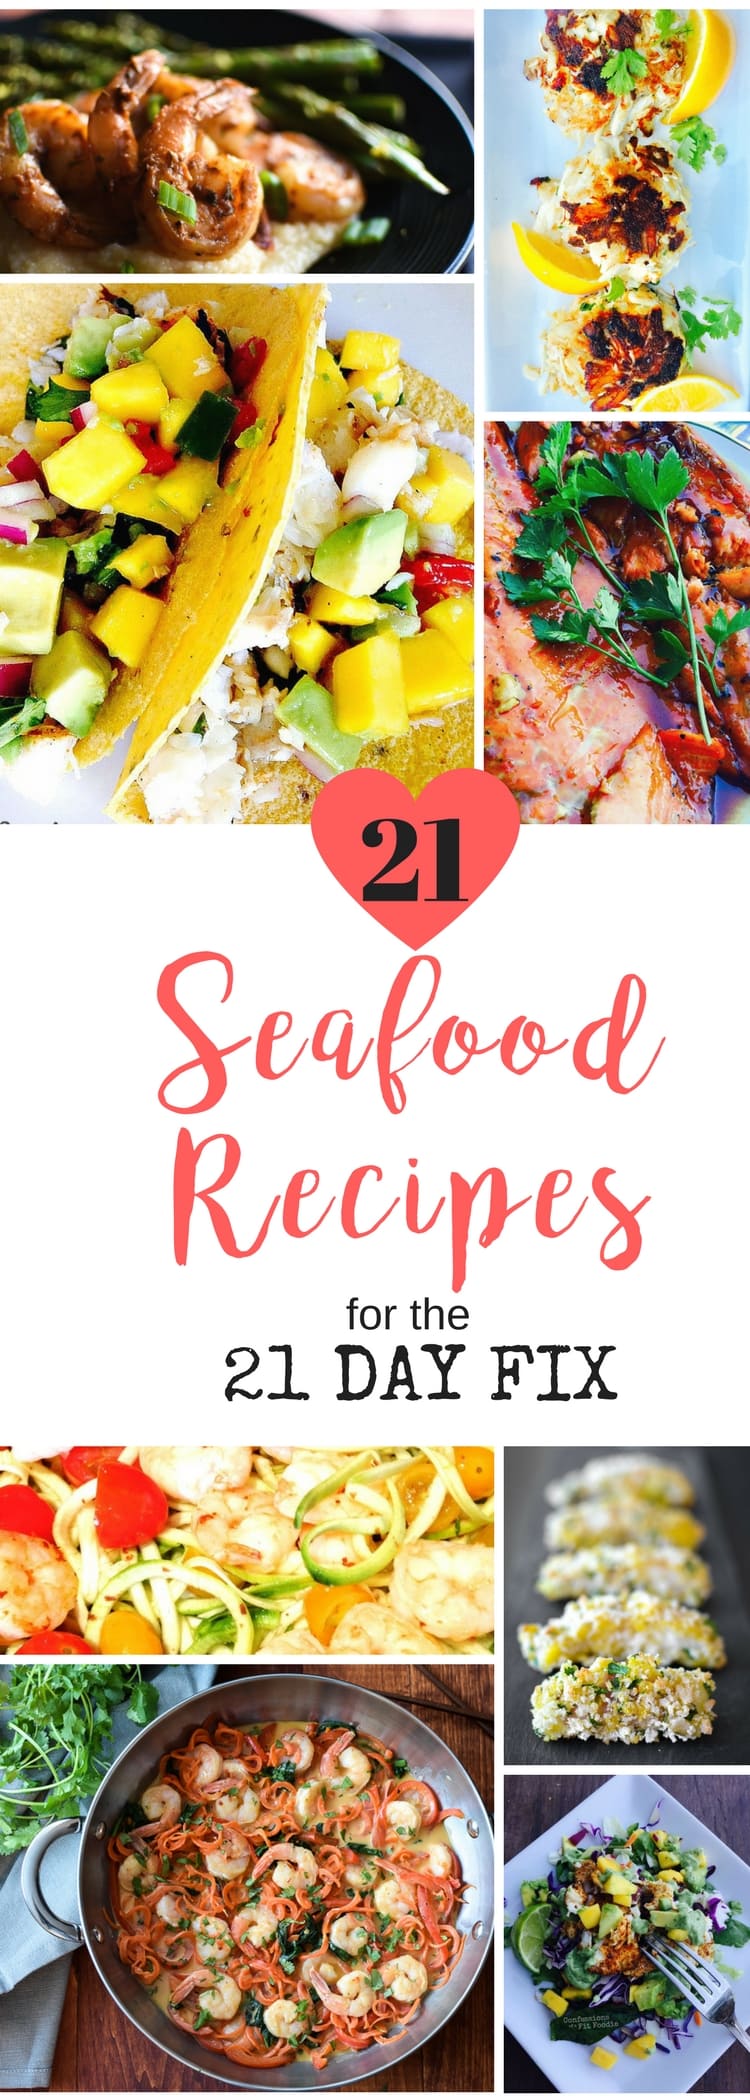 https://confessionsofafitfoodie.com/wp-content/uploads/2017/03/Seafood-Pin.jpg